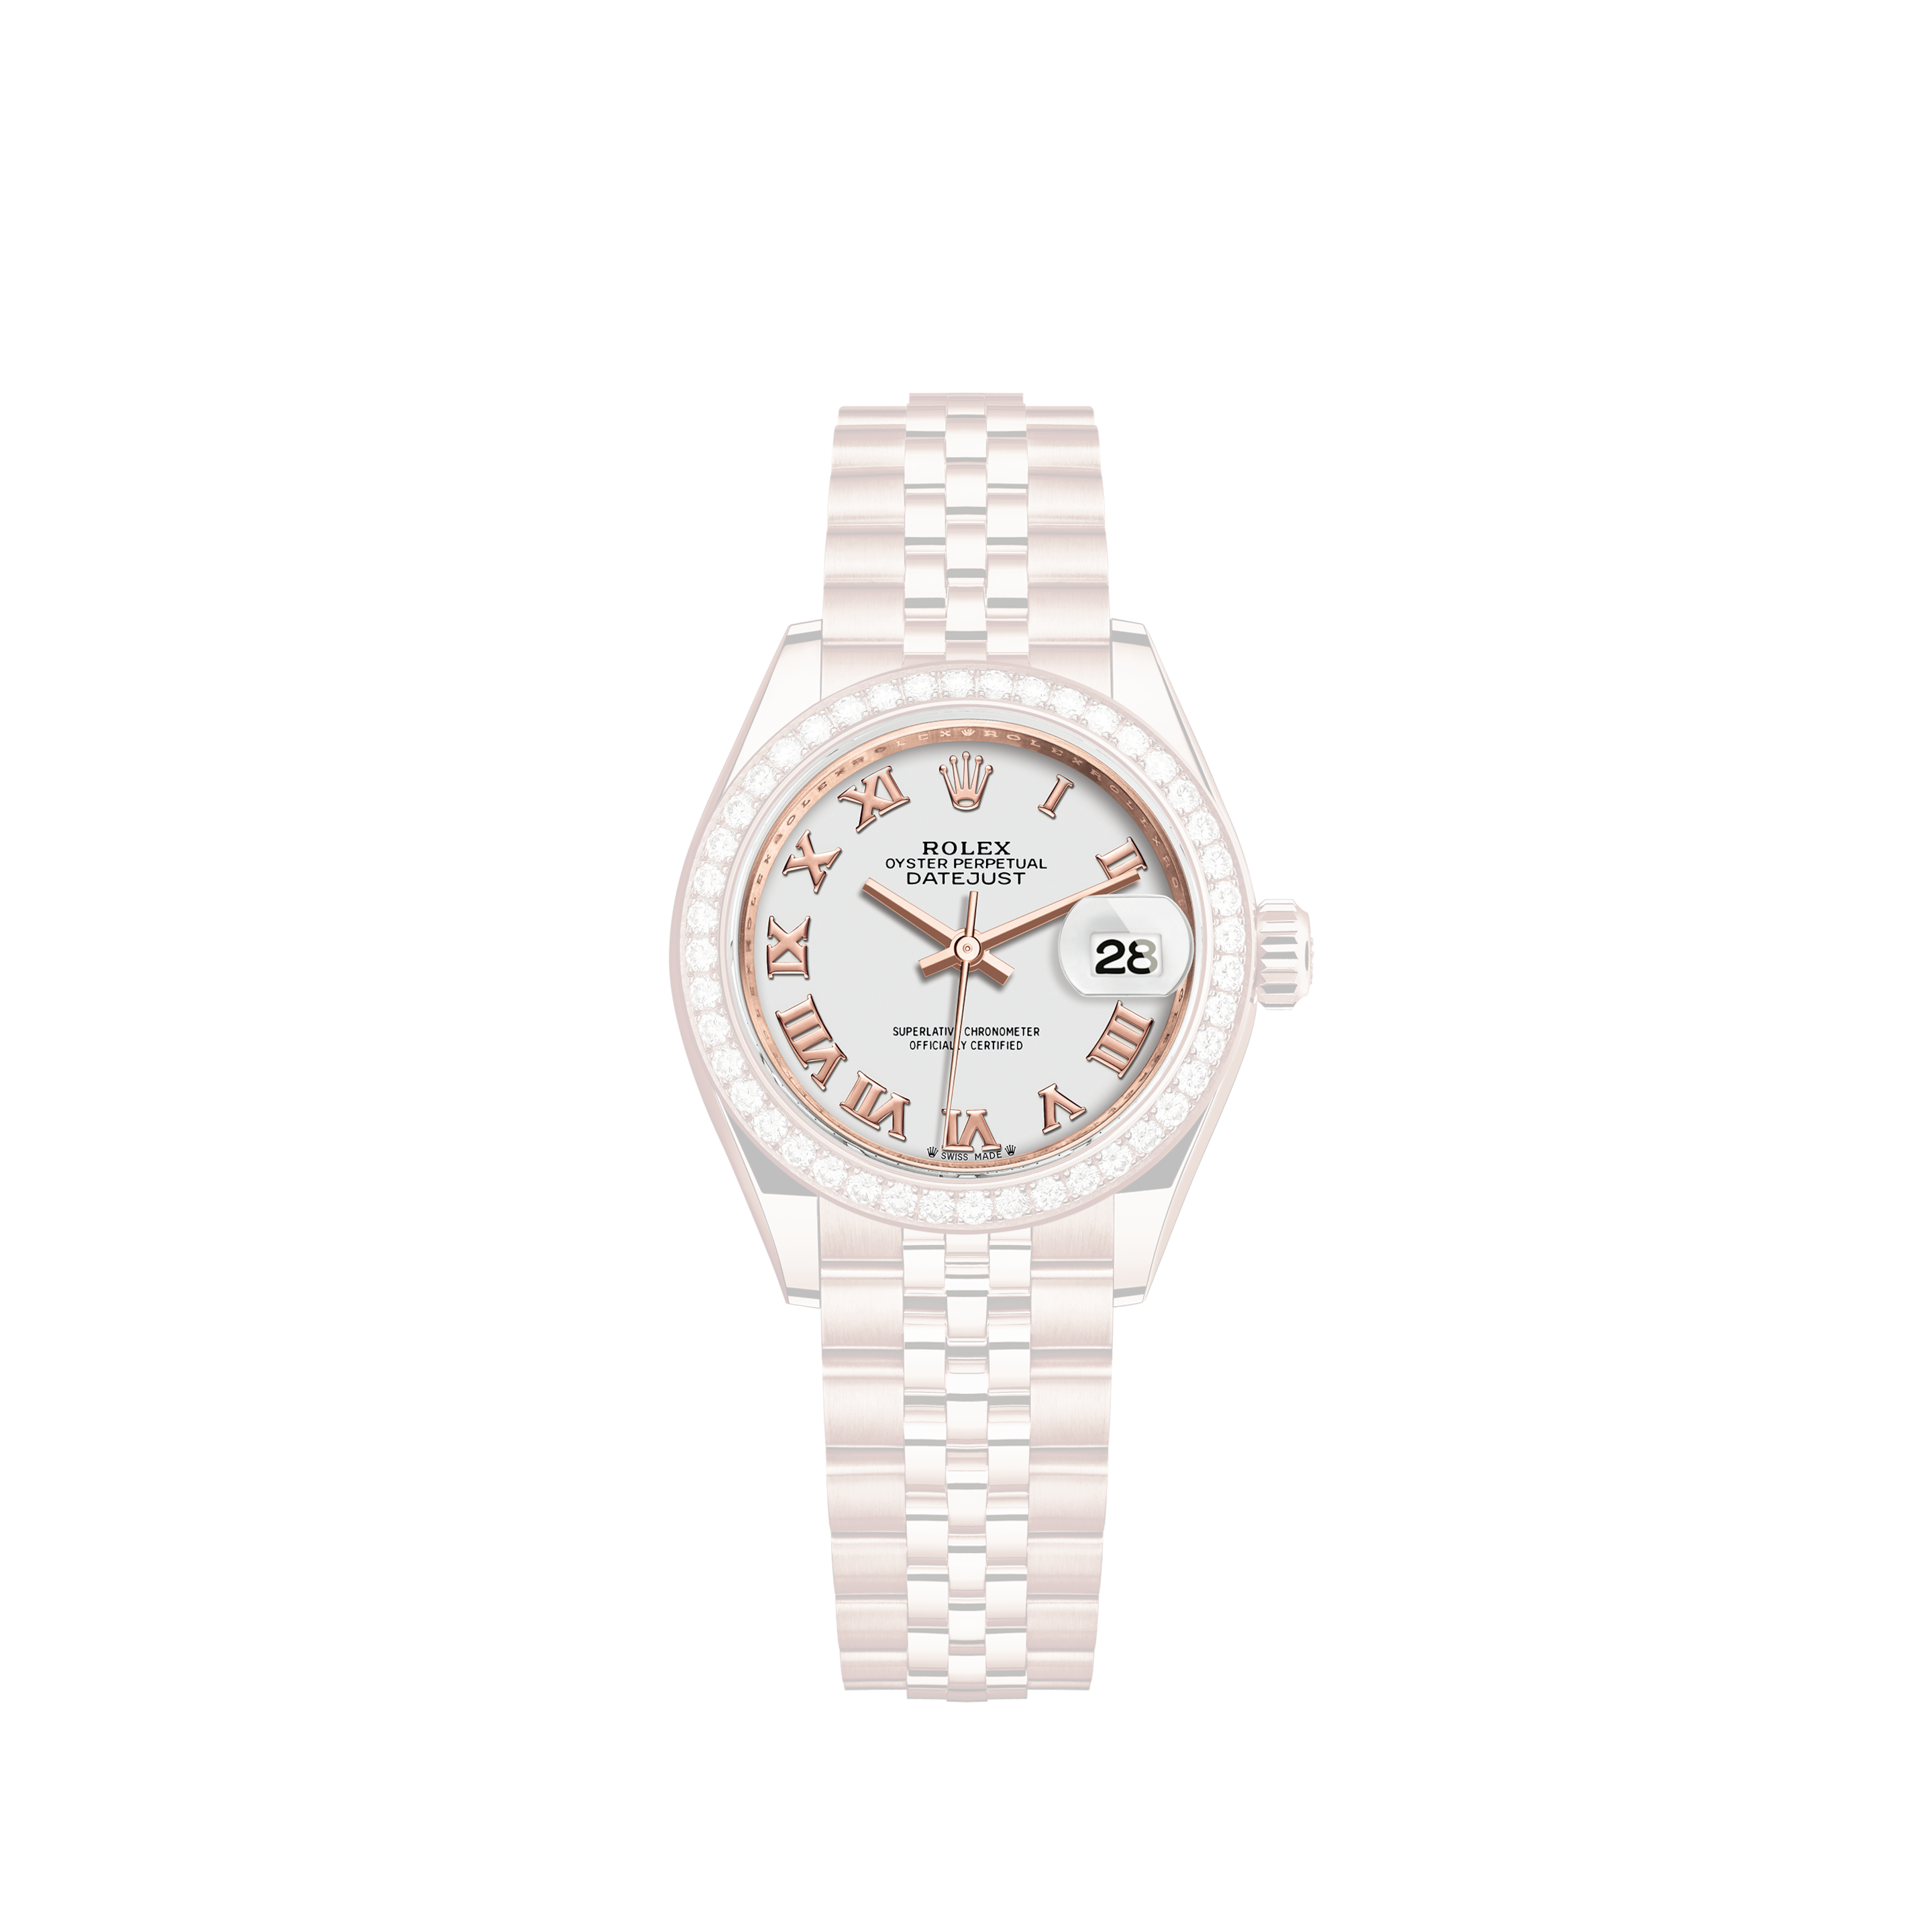 Rolex Ladies 31mm Rolex Datejust Tahitian MOP Mother of Pearl Diamond Dial Classic + Lugs RT Wrist WatchRolex Ladies 31mm Rolex Datejust Two Tone 18K Gold and SS Silver Dial/Diamond Bezel with Rubies/Lugs and Side Oyster Band 68273